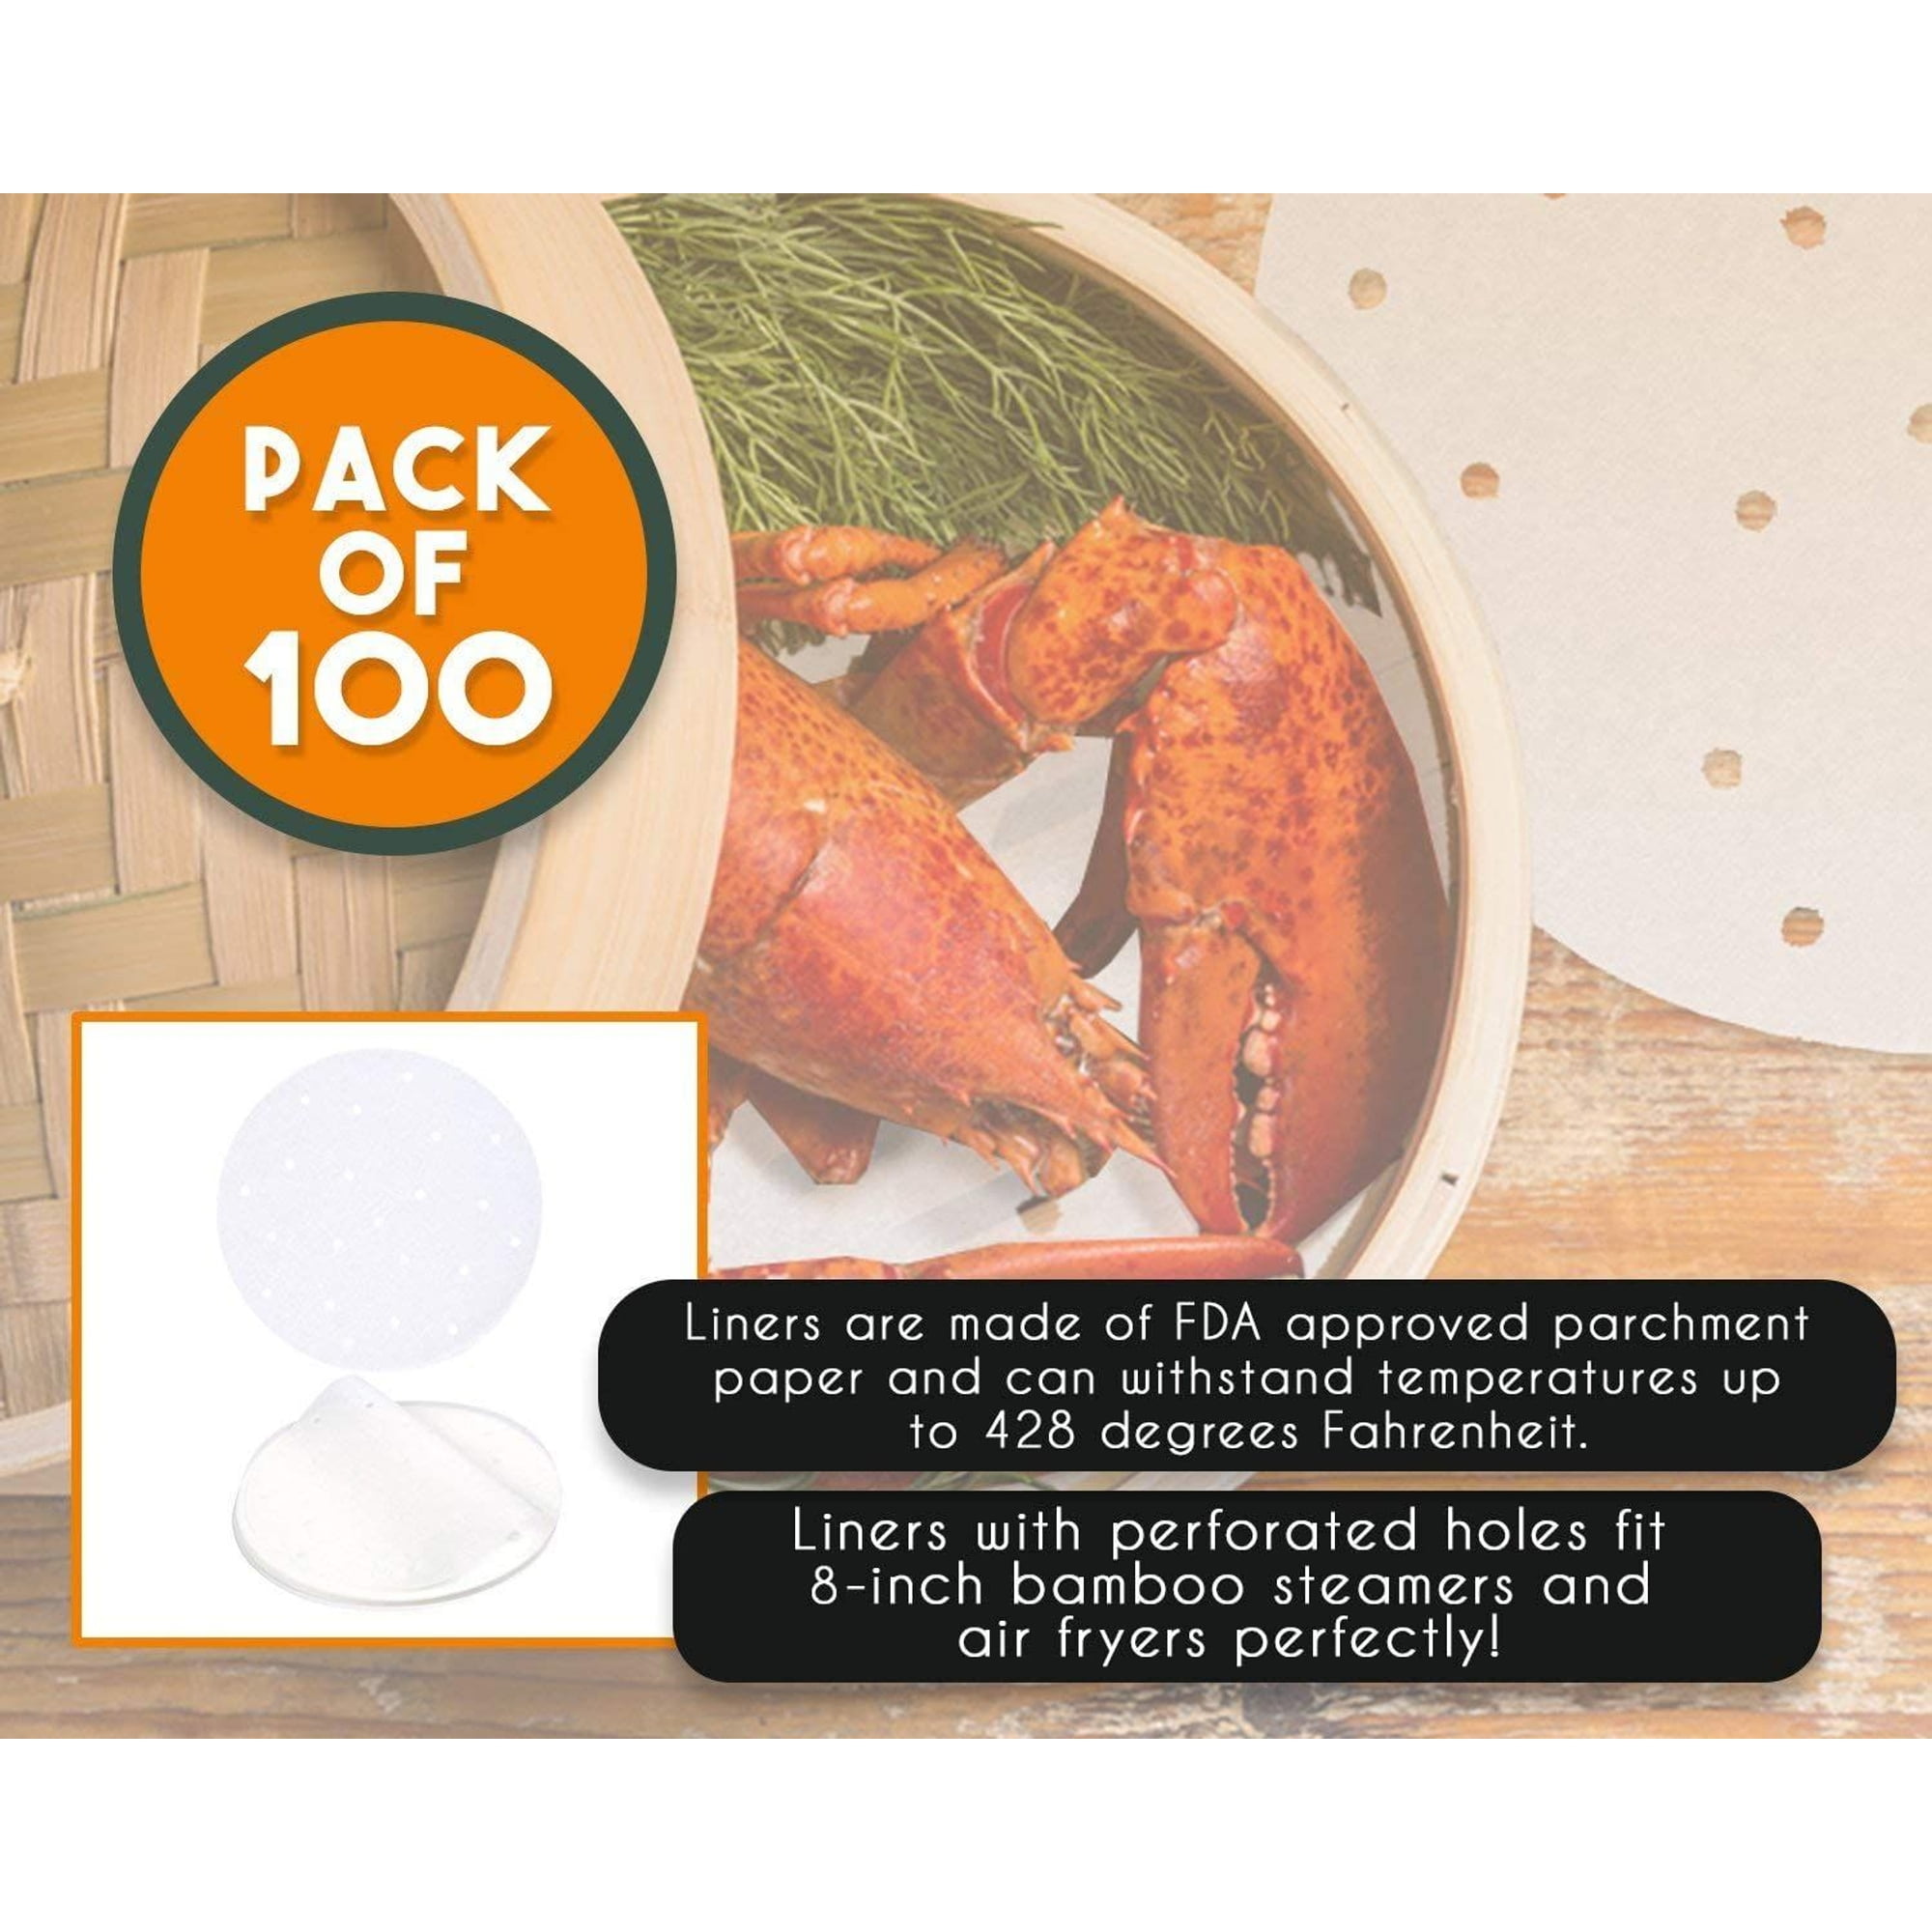 WXHHH Air Fryer Disposable Paper Liner, 100Pcs-6 Inch Liners for